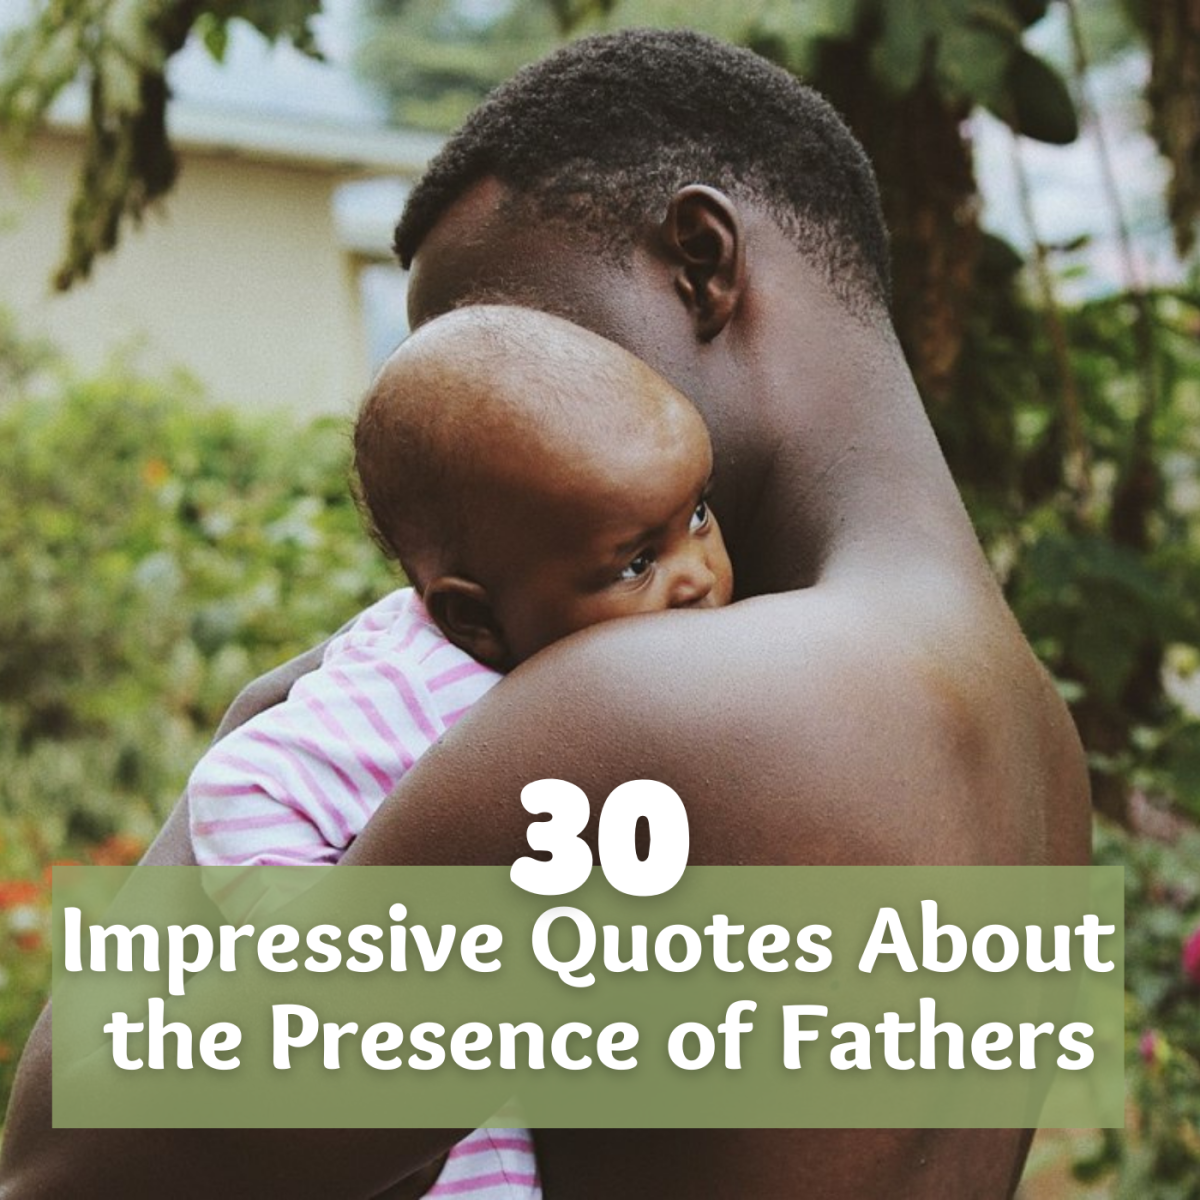 30 Impressive Quotes About the Presence of Fathers